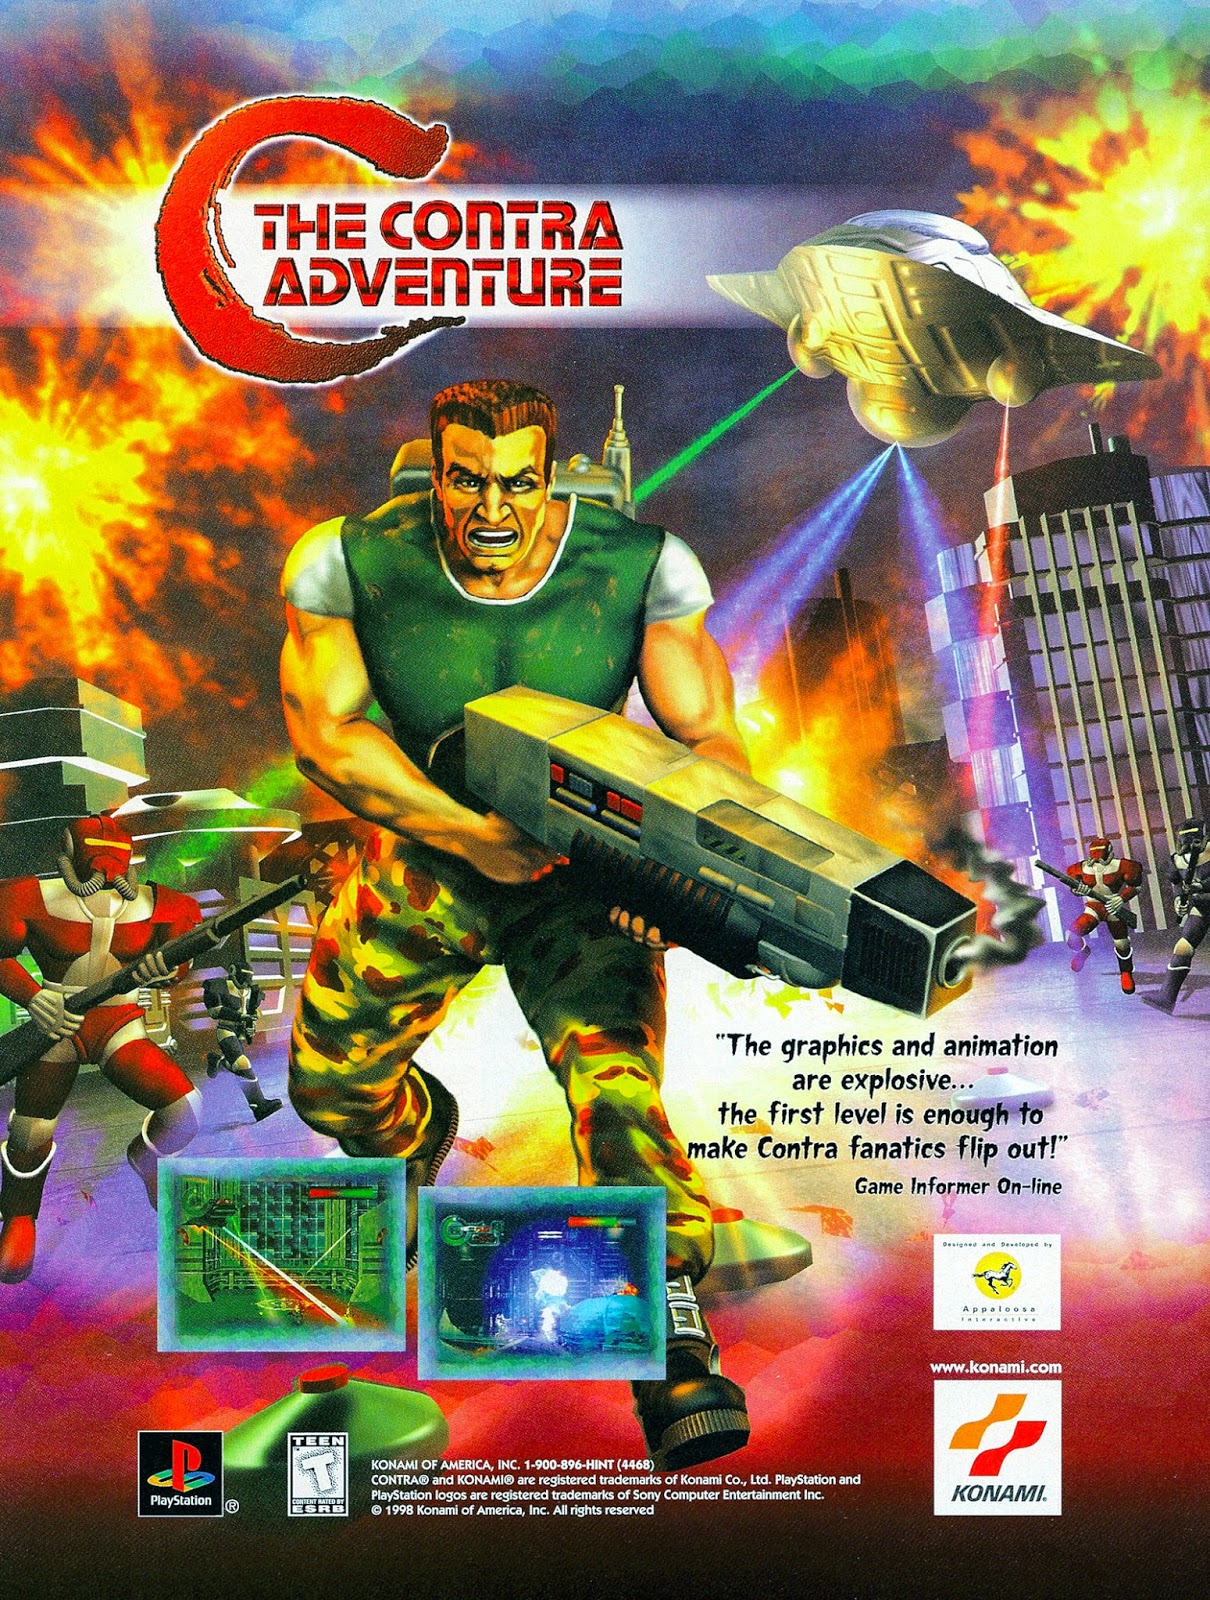 Download tải Game Contra Adventure Cho PC